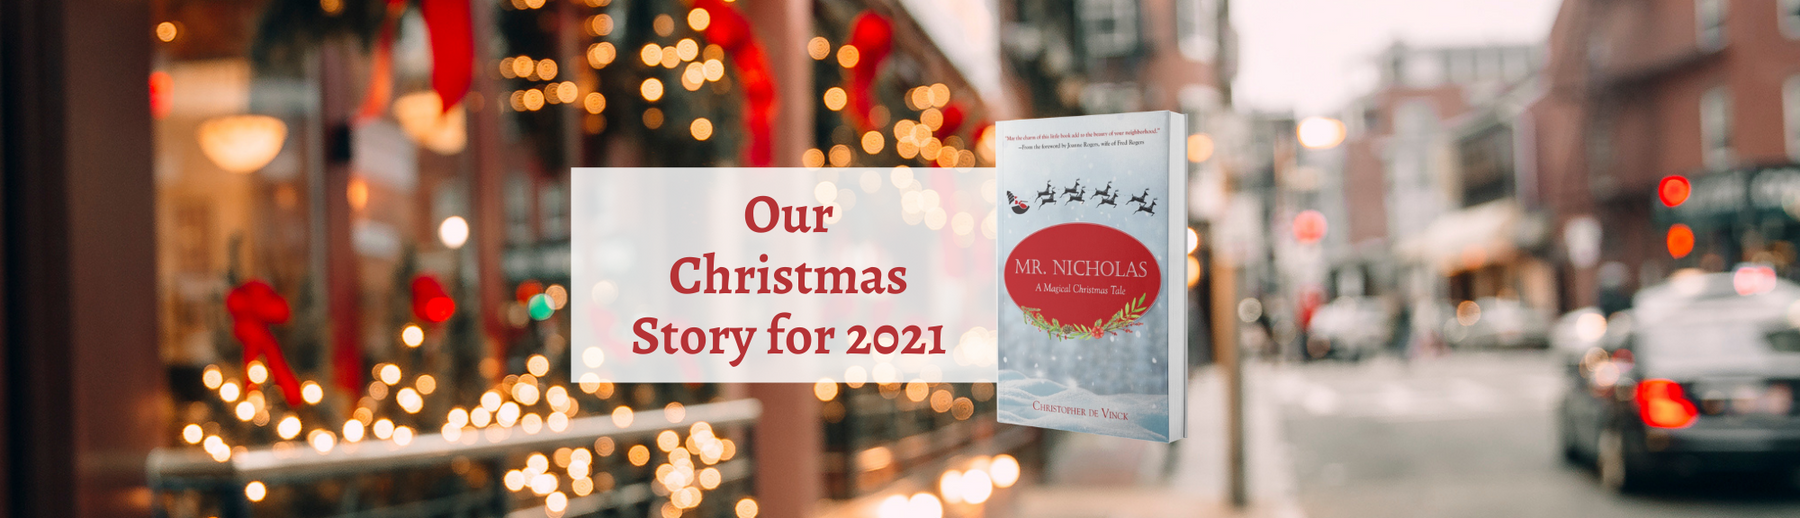 Mr. Rogers’ fish, flying reindeer, and the wonder of a child – the story you need this Christmas!